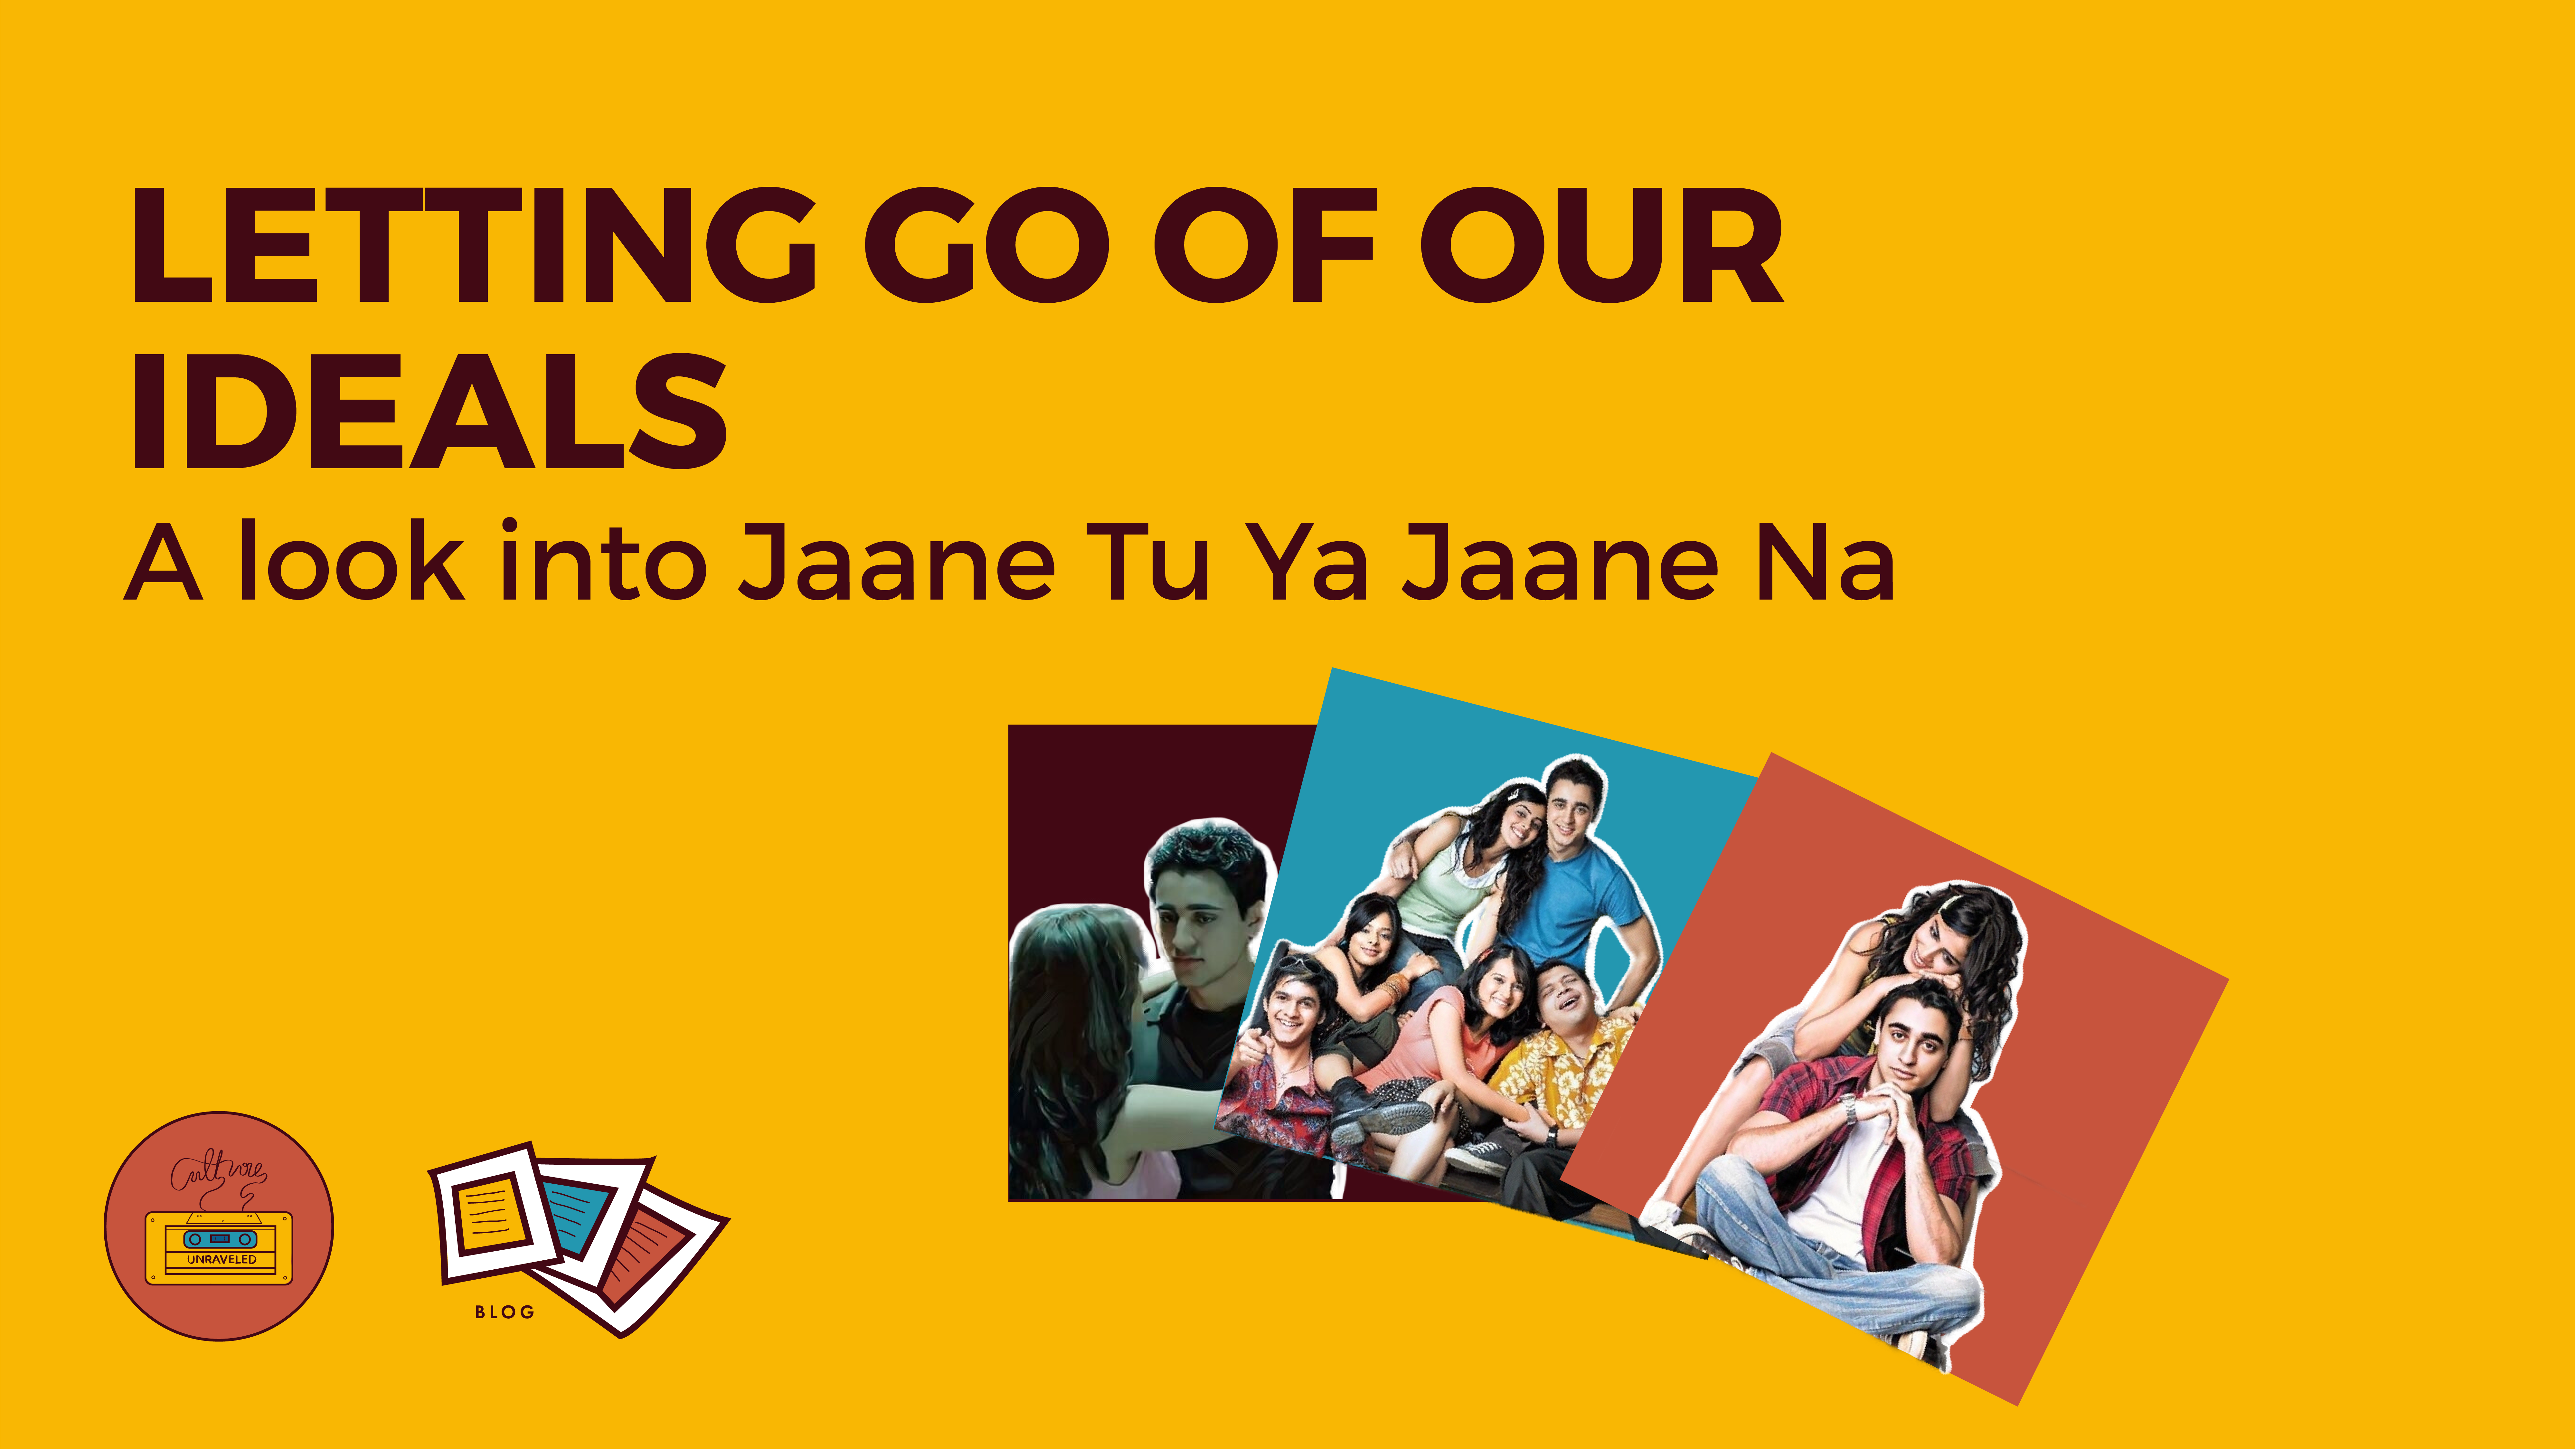 Letting Go of Our Ideals. A look into Jaane Tu Ya Jaane Na